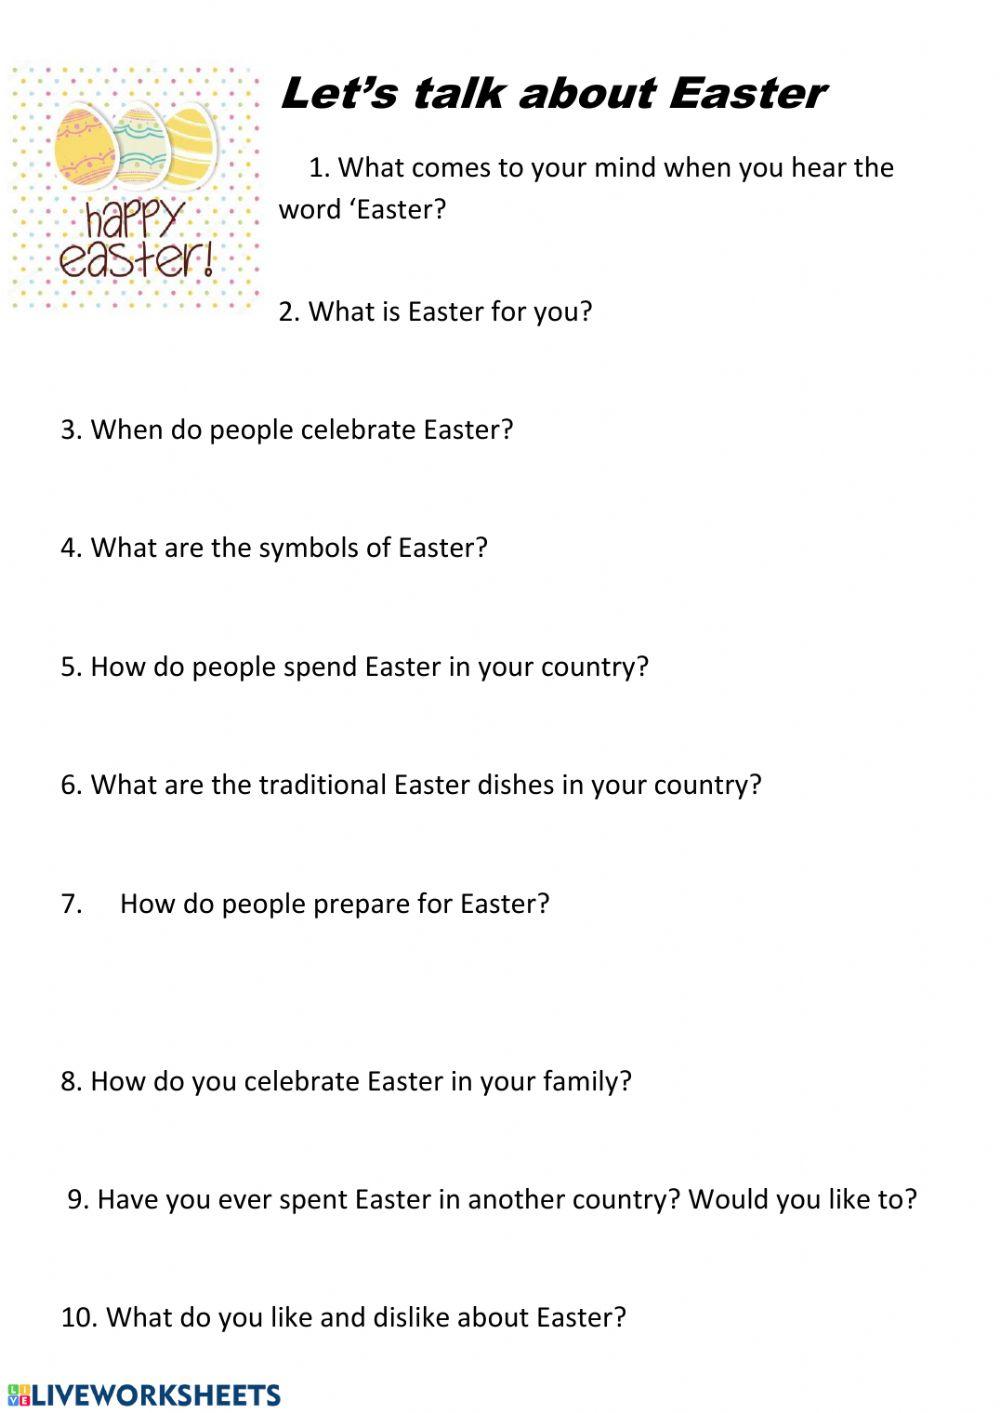 Let's talk about Easter